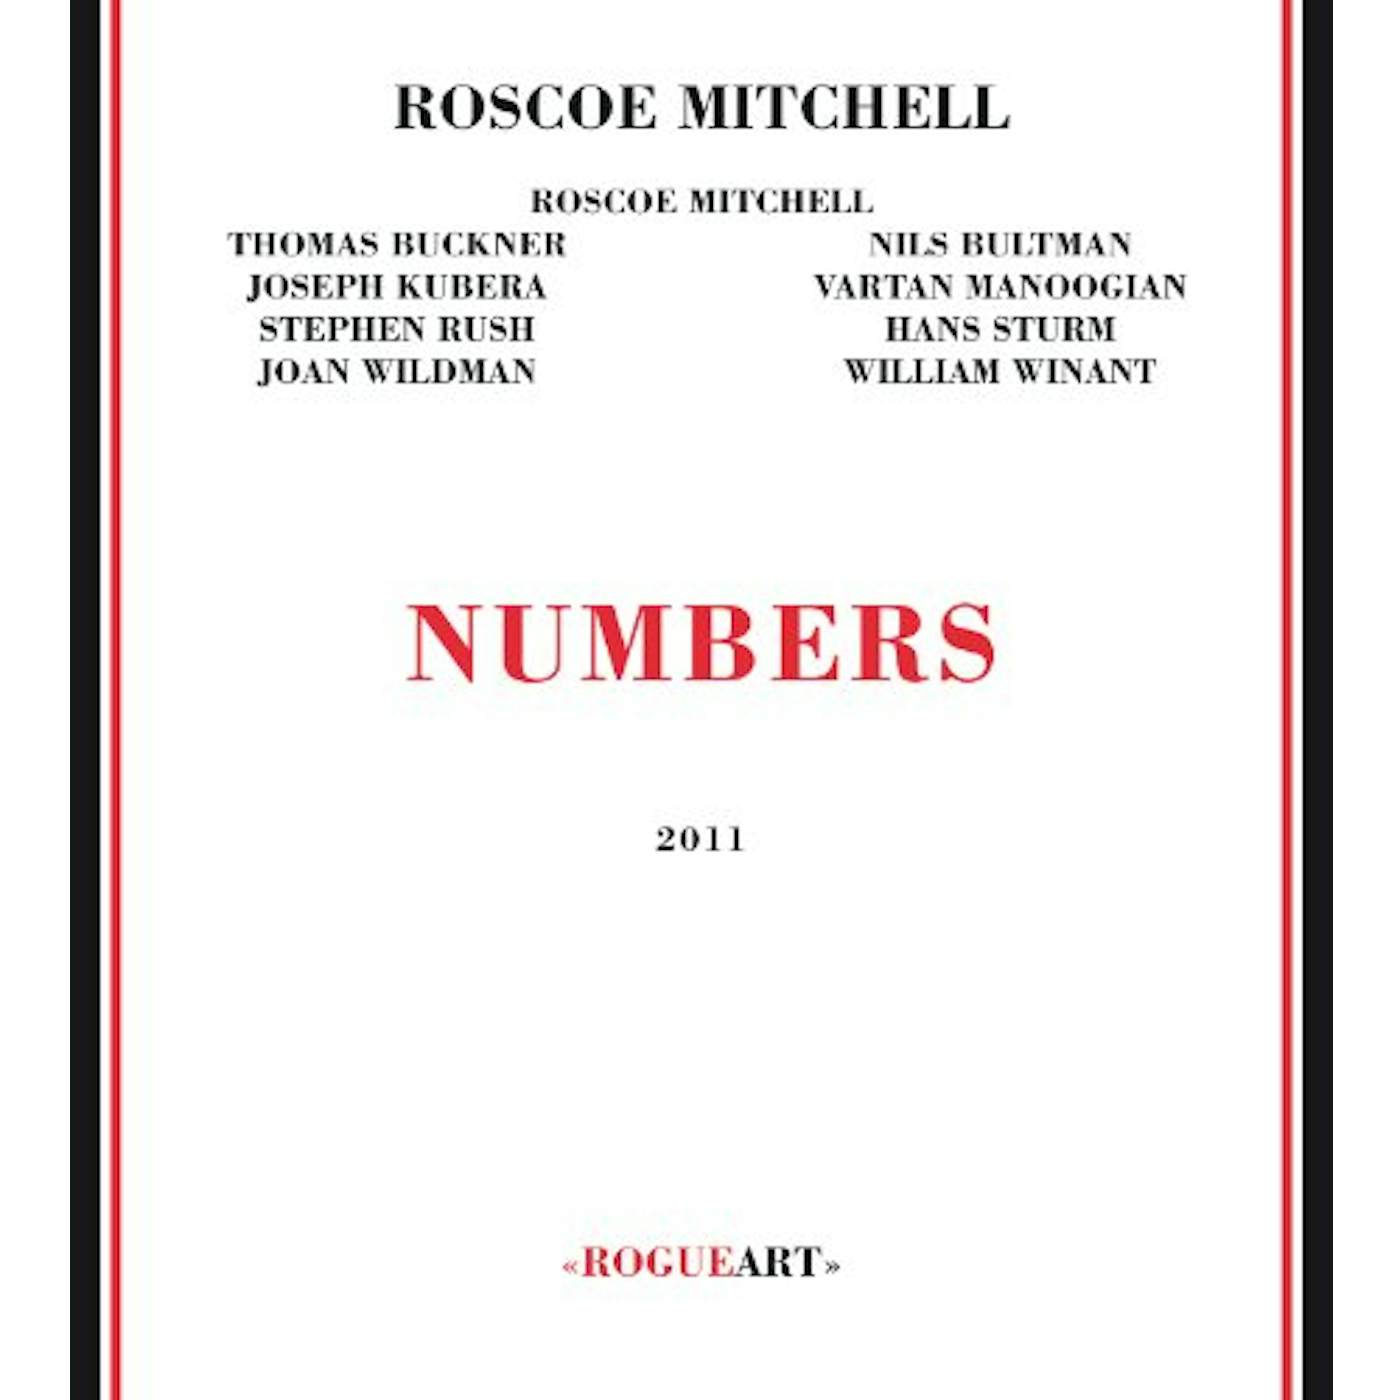 Roscoe Mitchell NUMBERS CD